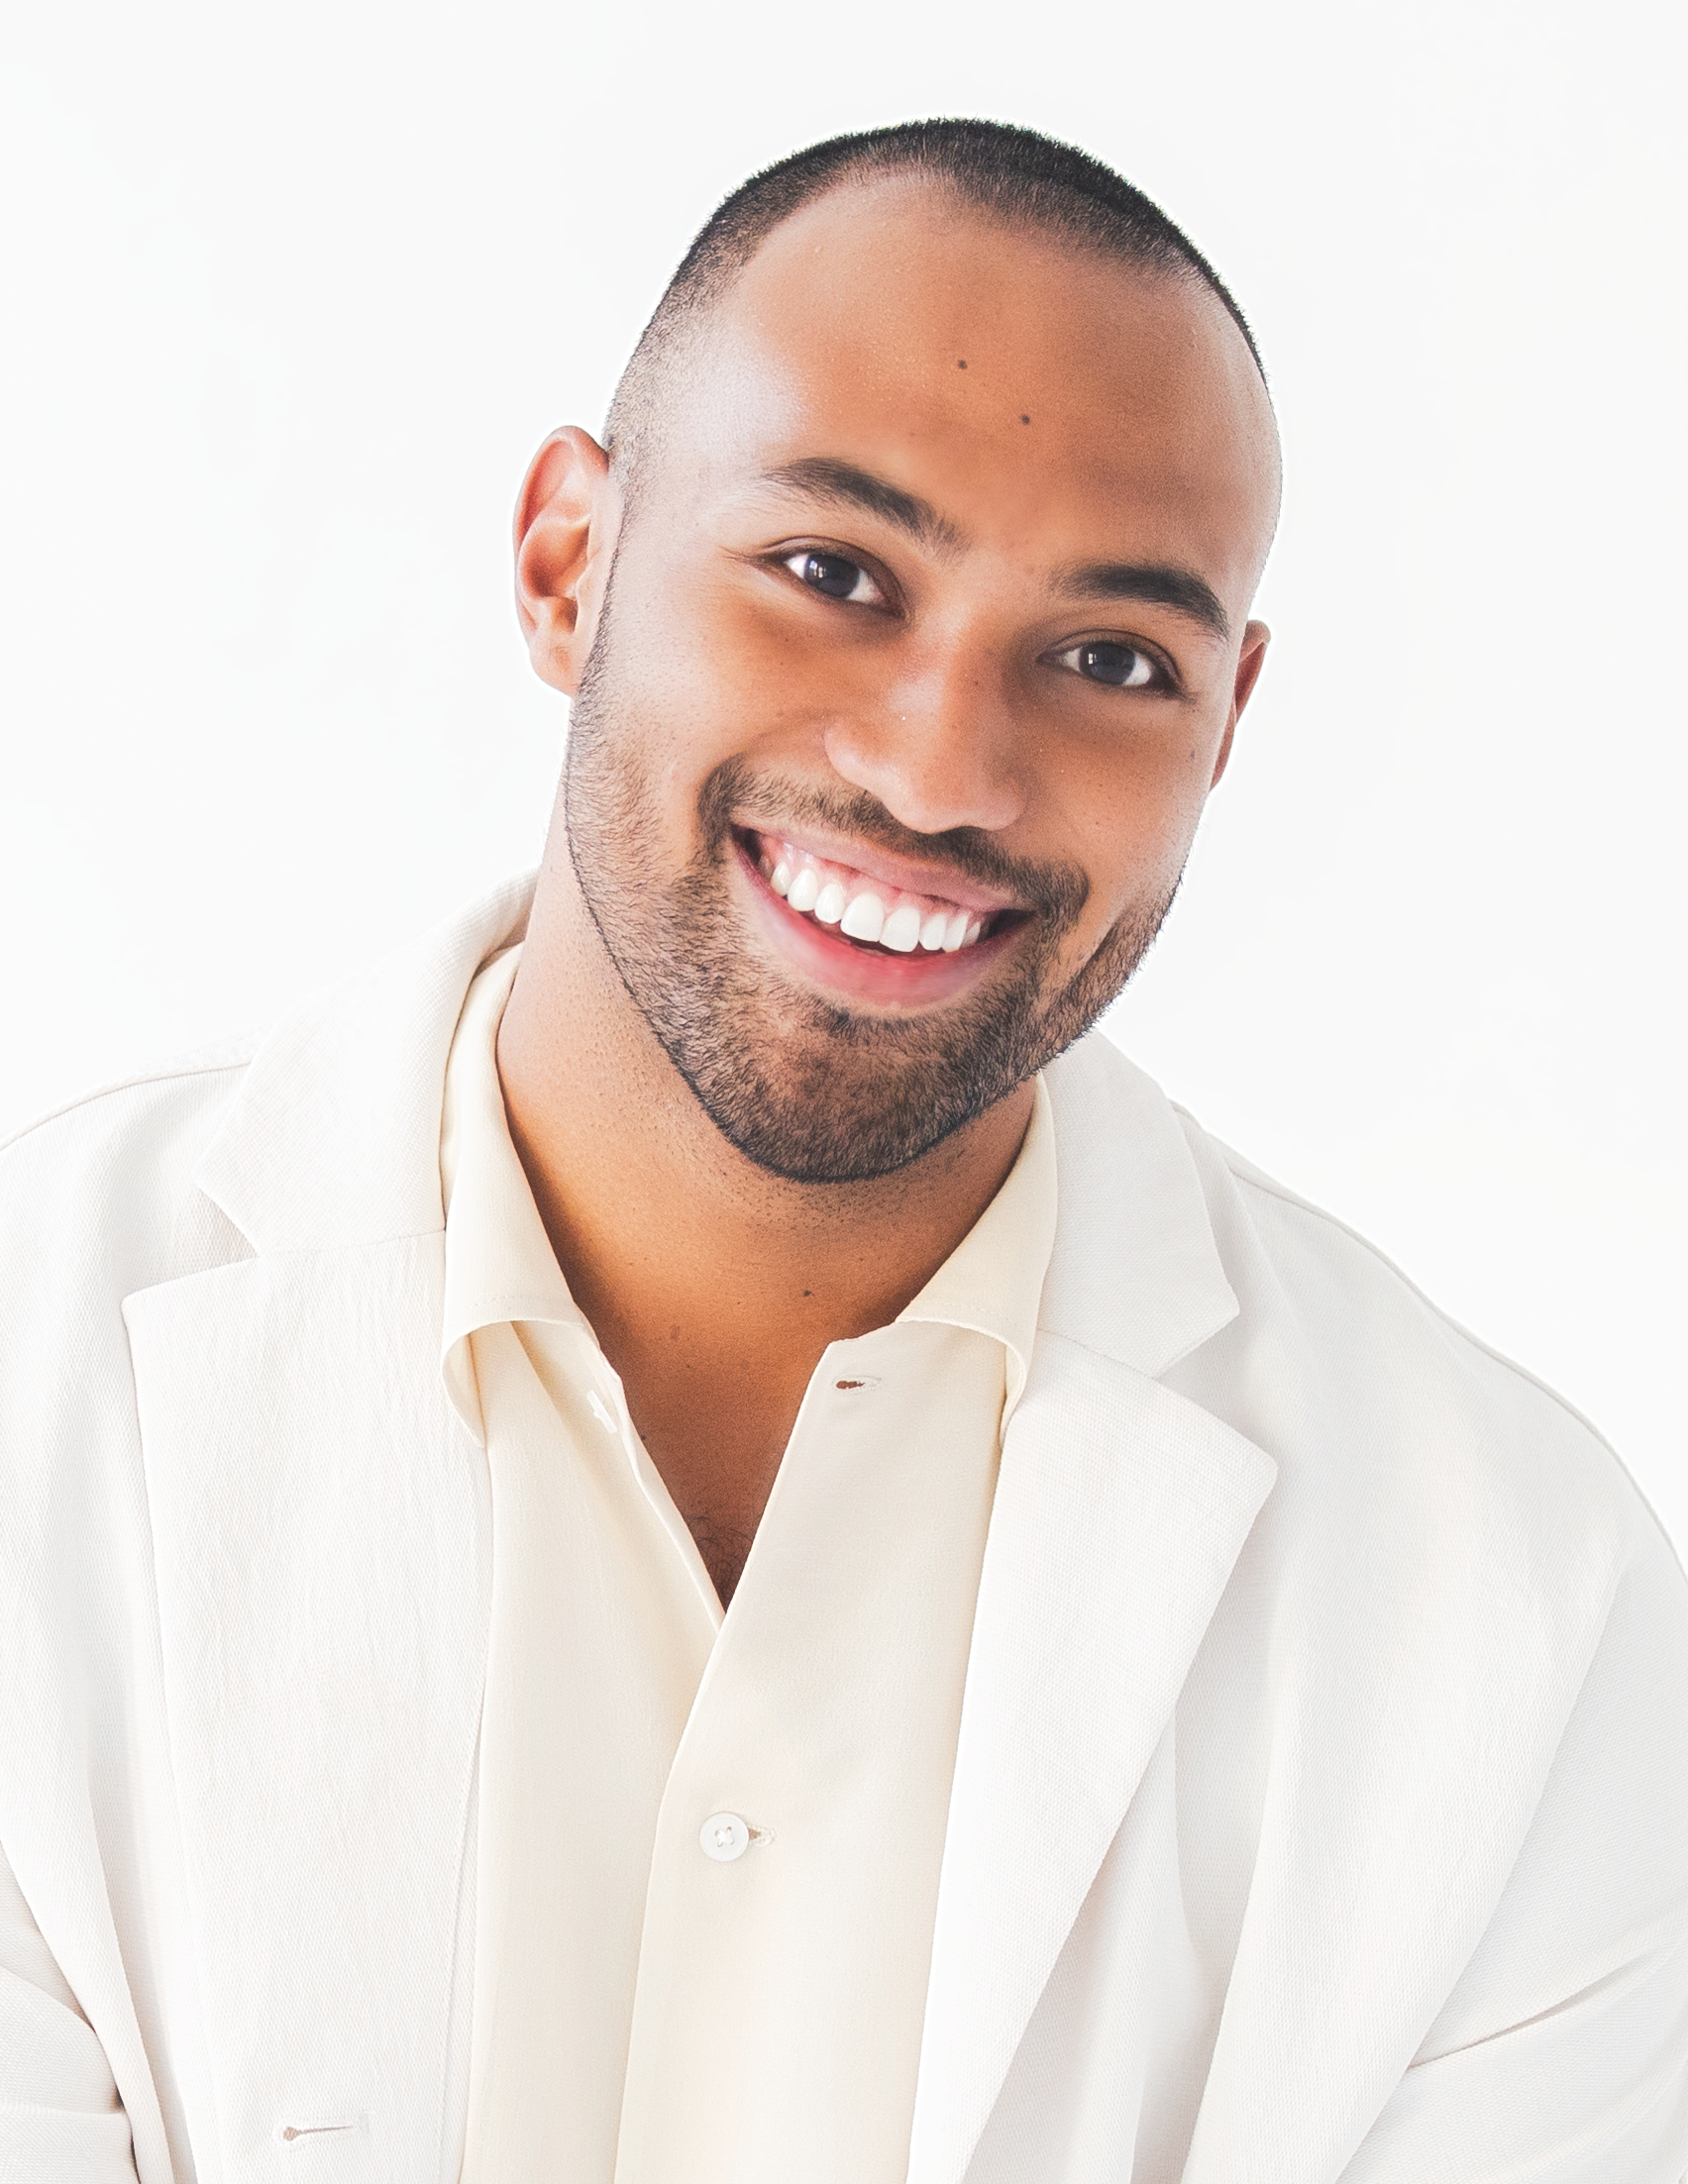 A portrait of Adam Hyndman who poses in a white shirt against a white background. He has light brown skin, a light beard, and smiles broadly at us.